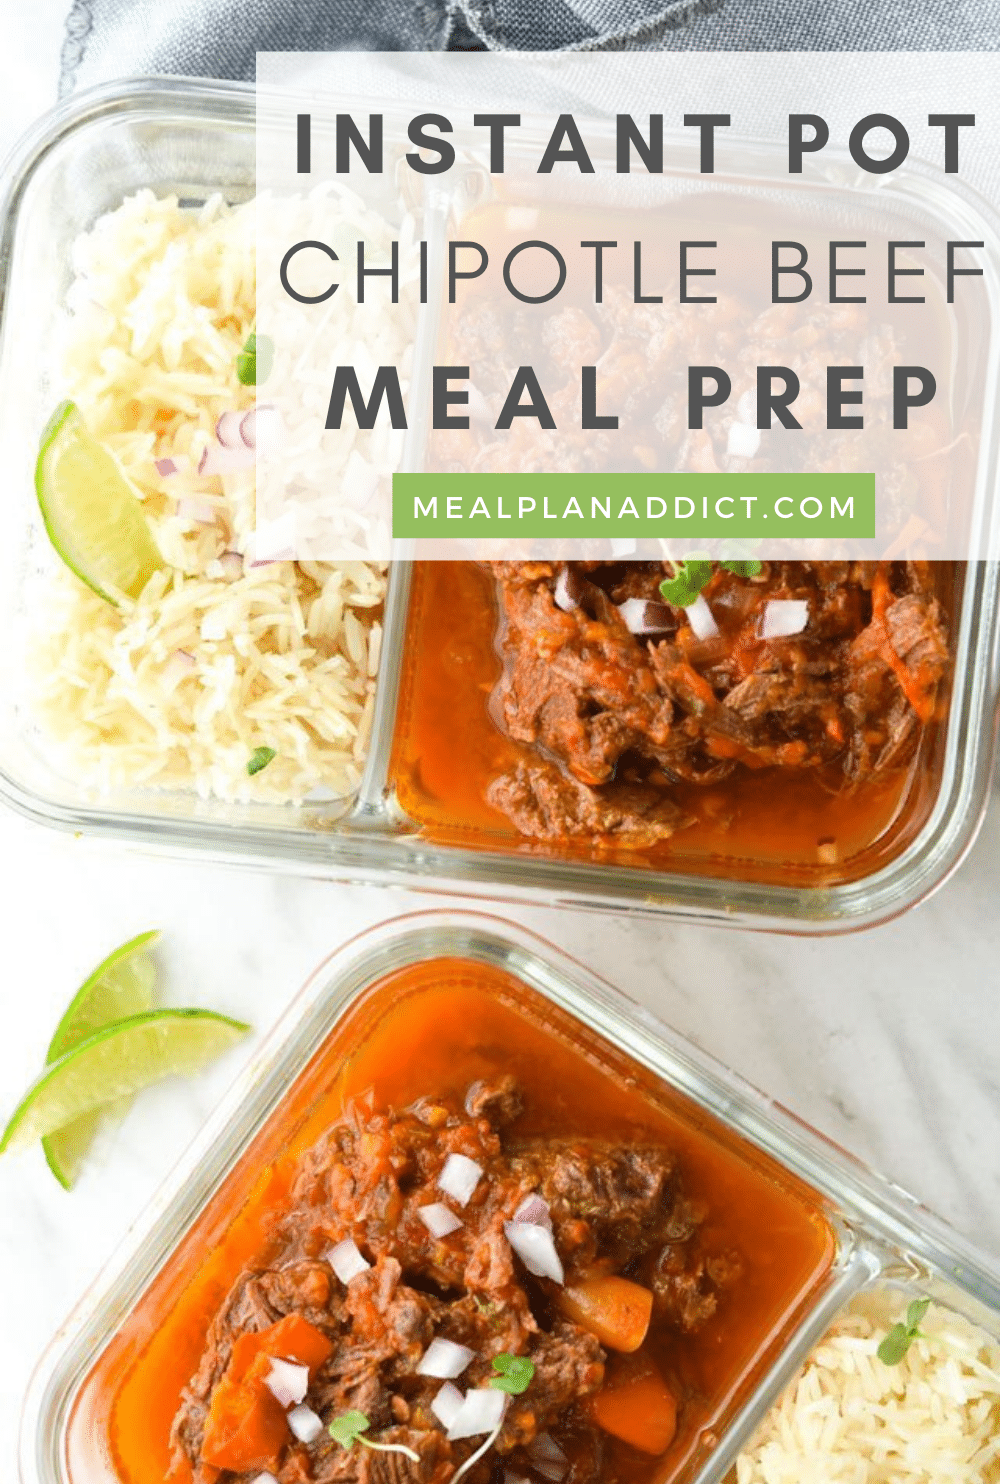 Chipotle Beef pin for Pinterest